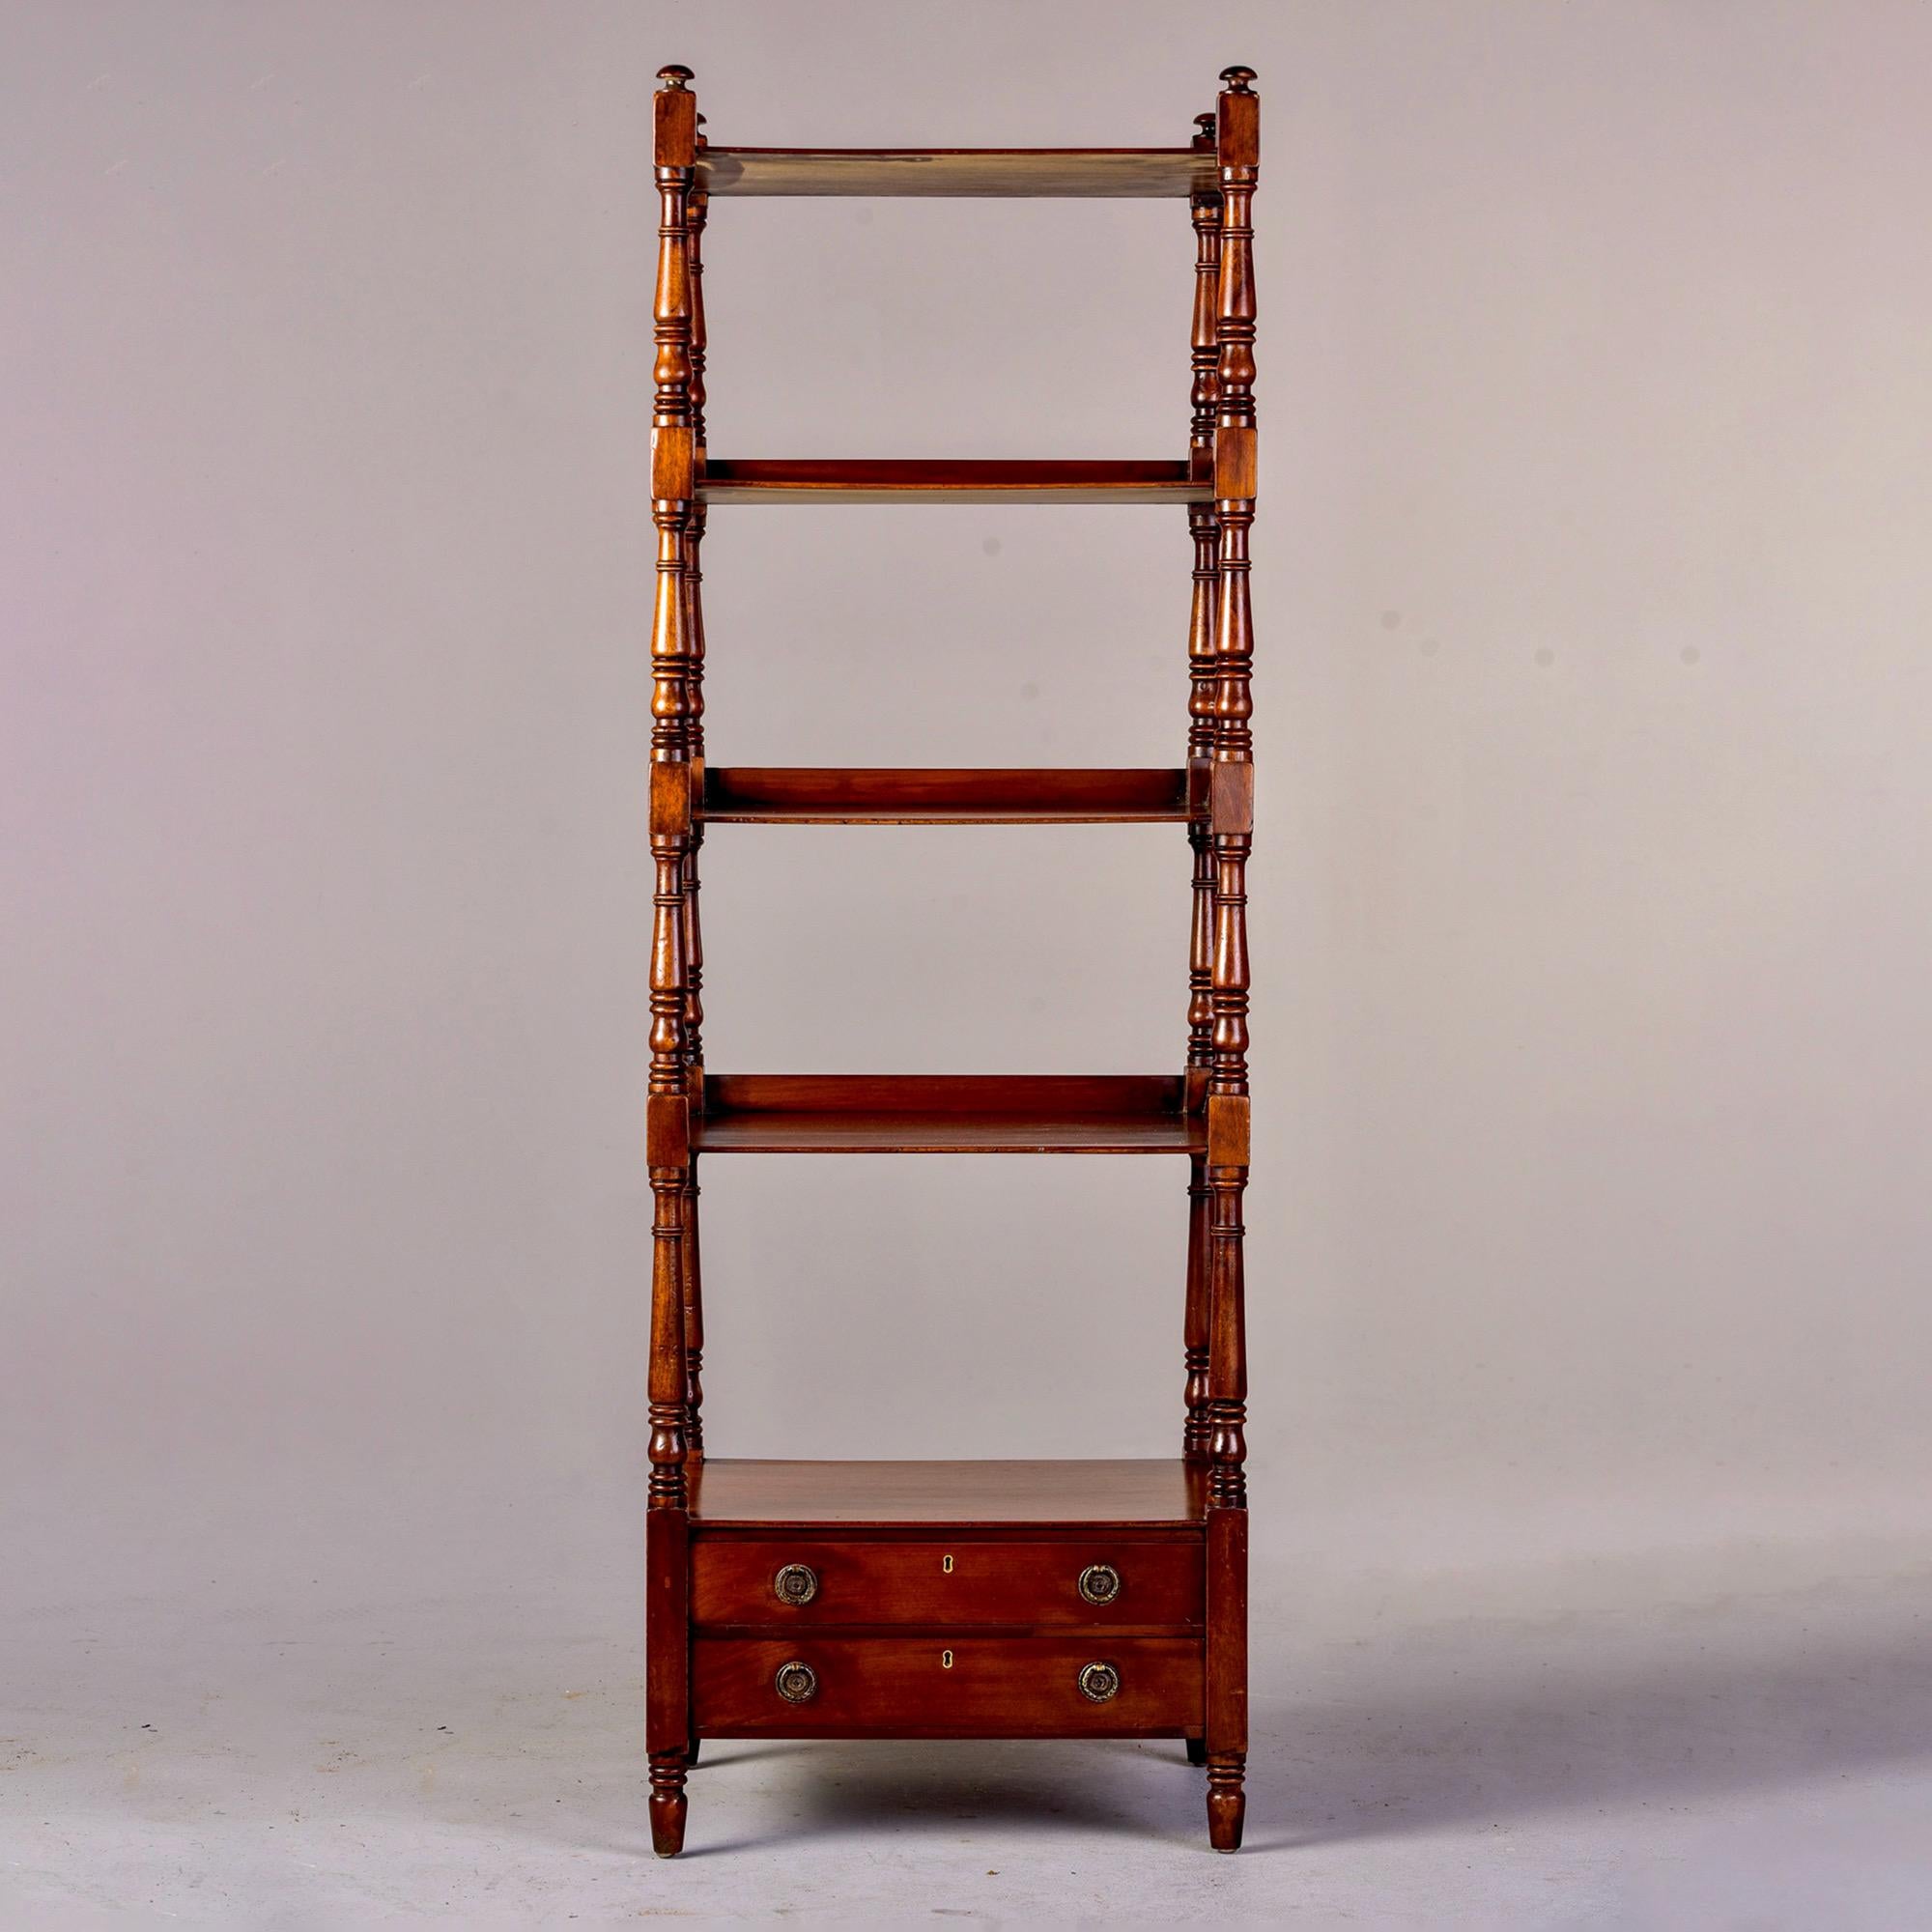 Turned Early 20th C English Mahogany Four Tier Etagere or What Not Shelf